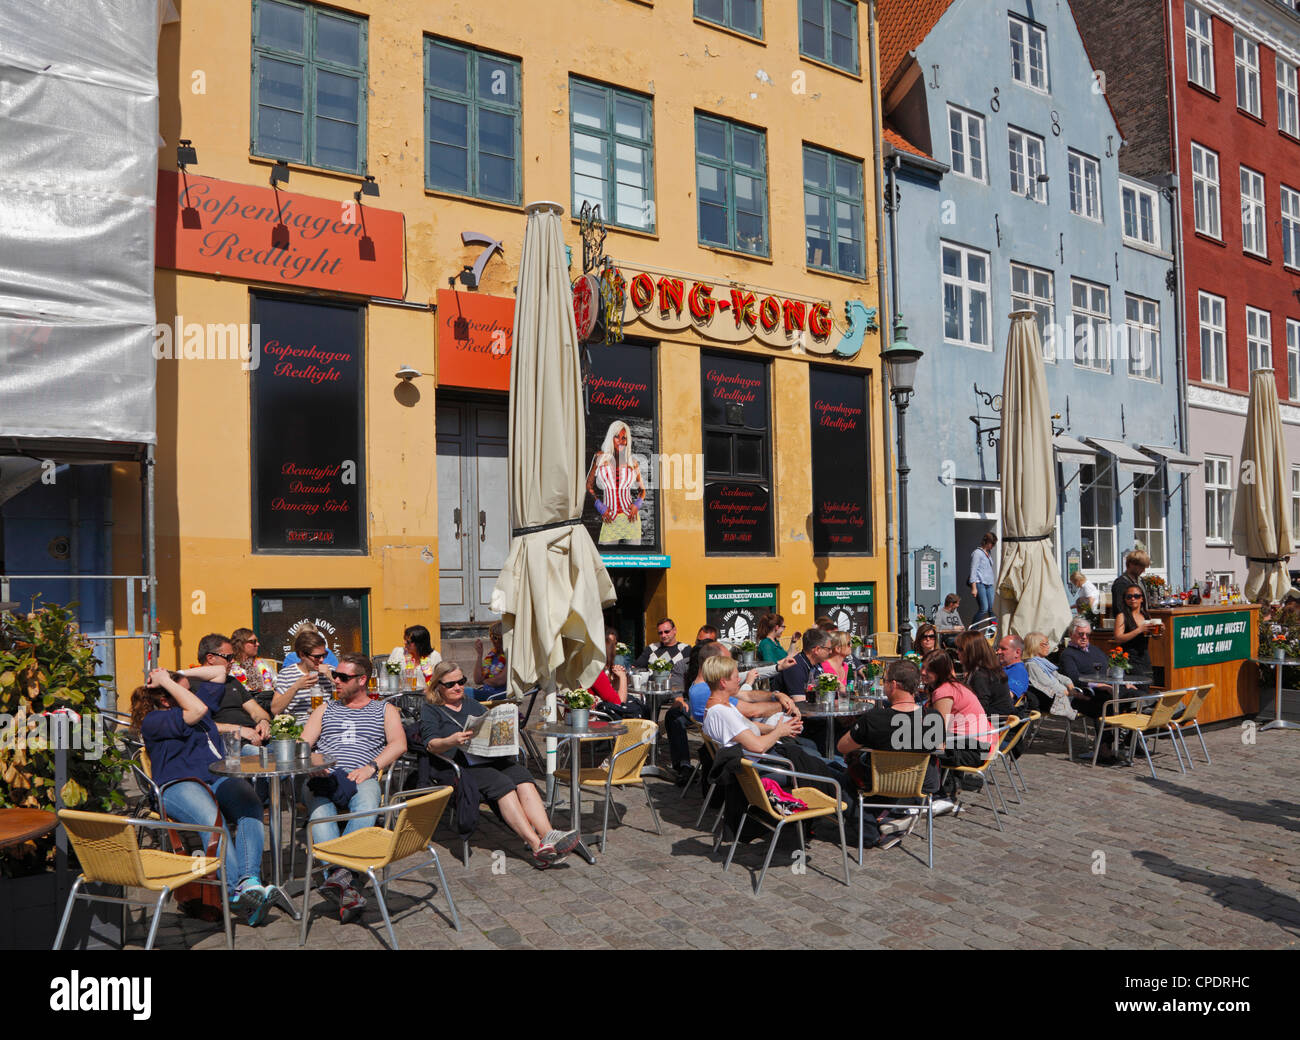 pavement restaurants in the painted buildings in the red-light district of Nyhavn Copenhagen, Denmark Photo - Alamy